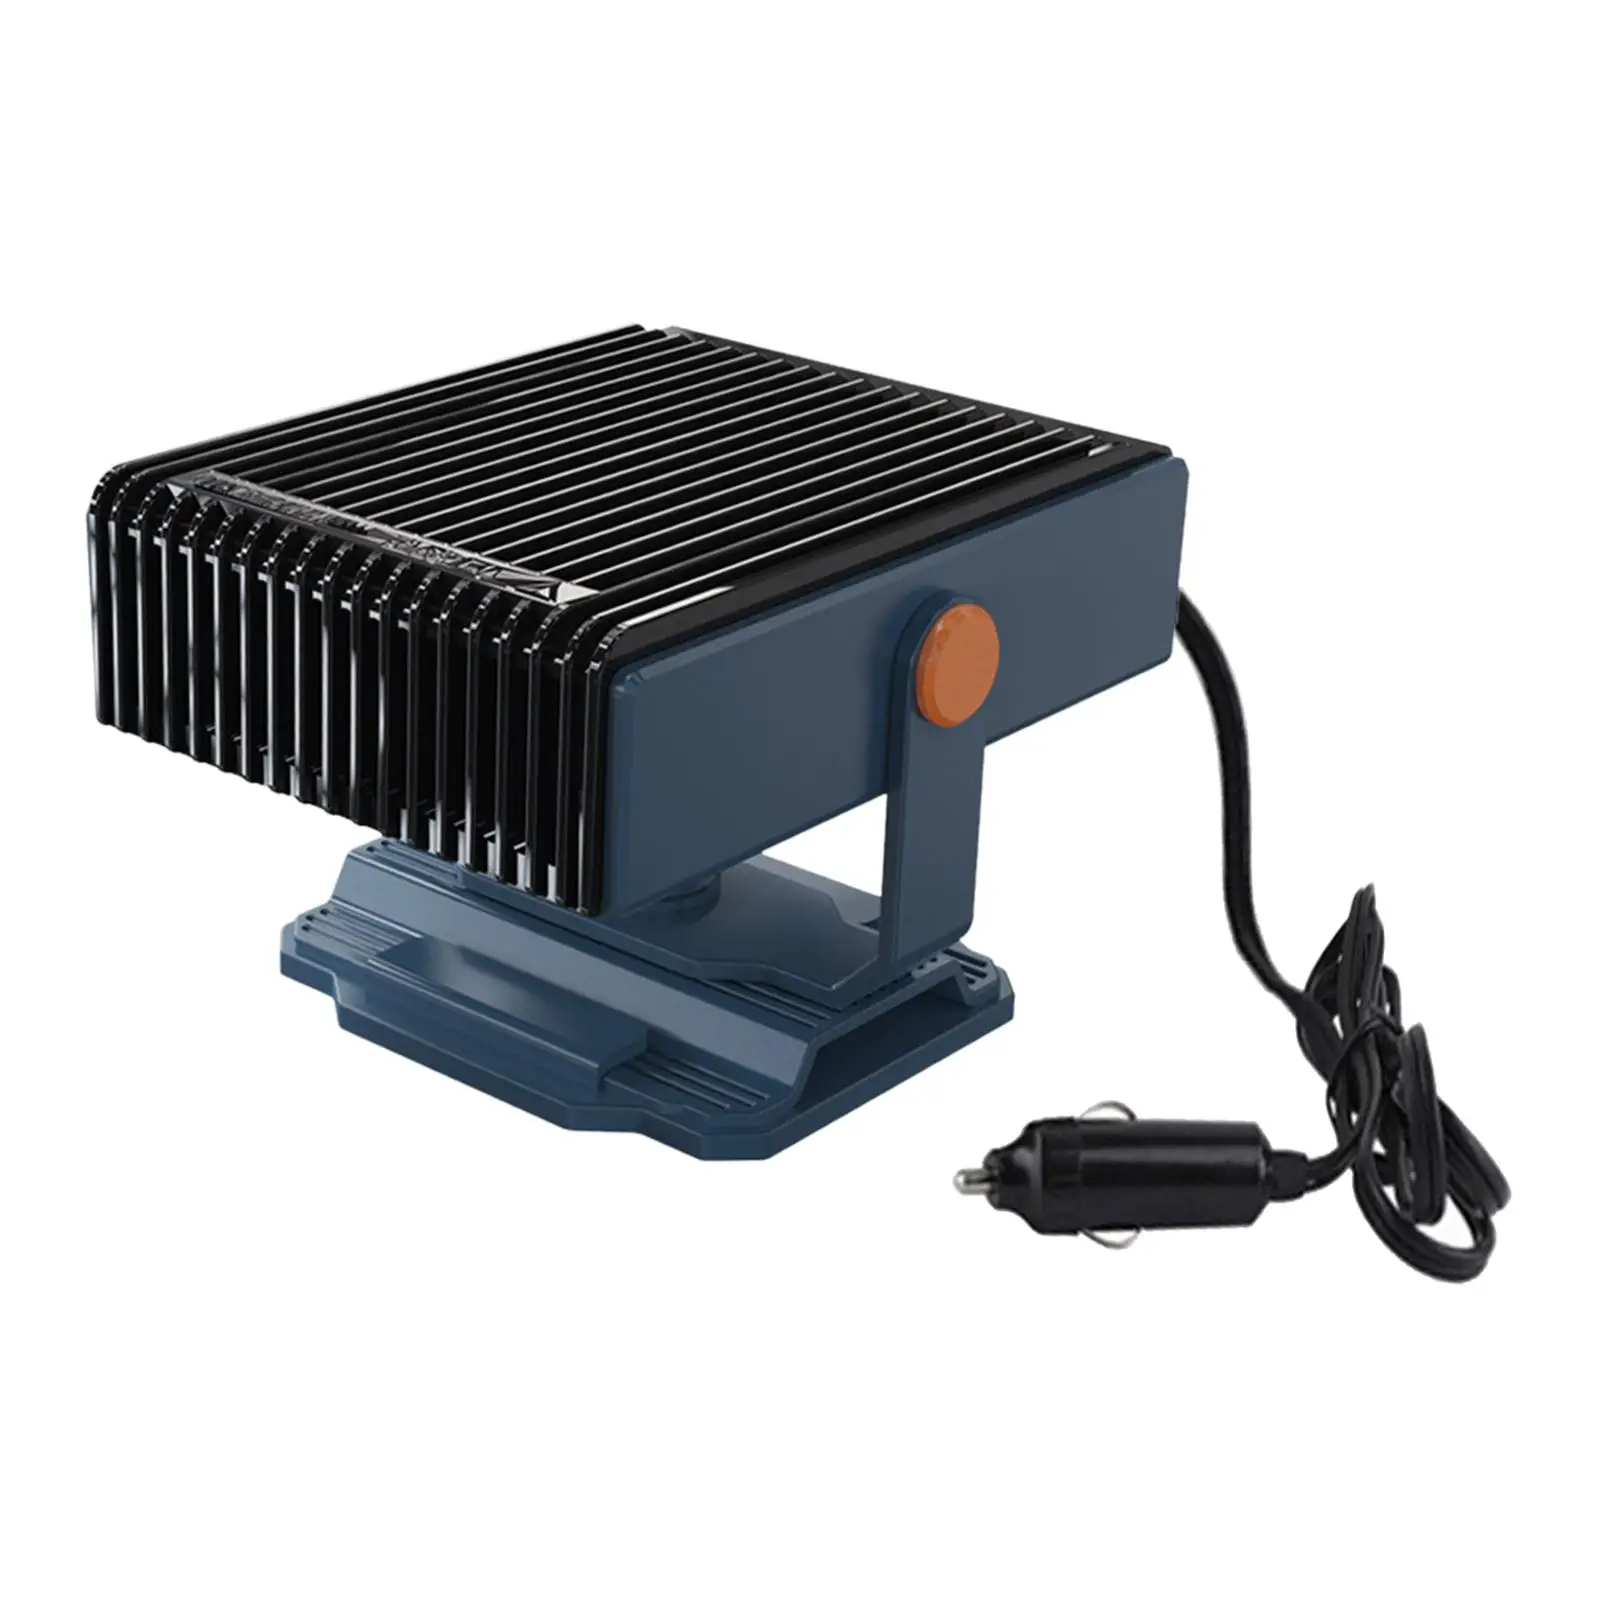 12V Car Heater Heating and Cooling Fan Multifunction 12V 150W 360 Rotatable Winter Heating Warmer for Car SUV Boat Truck RV